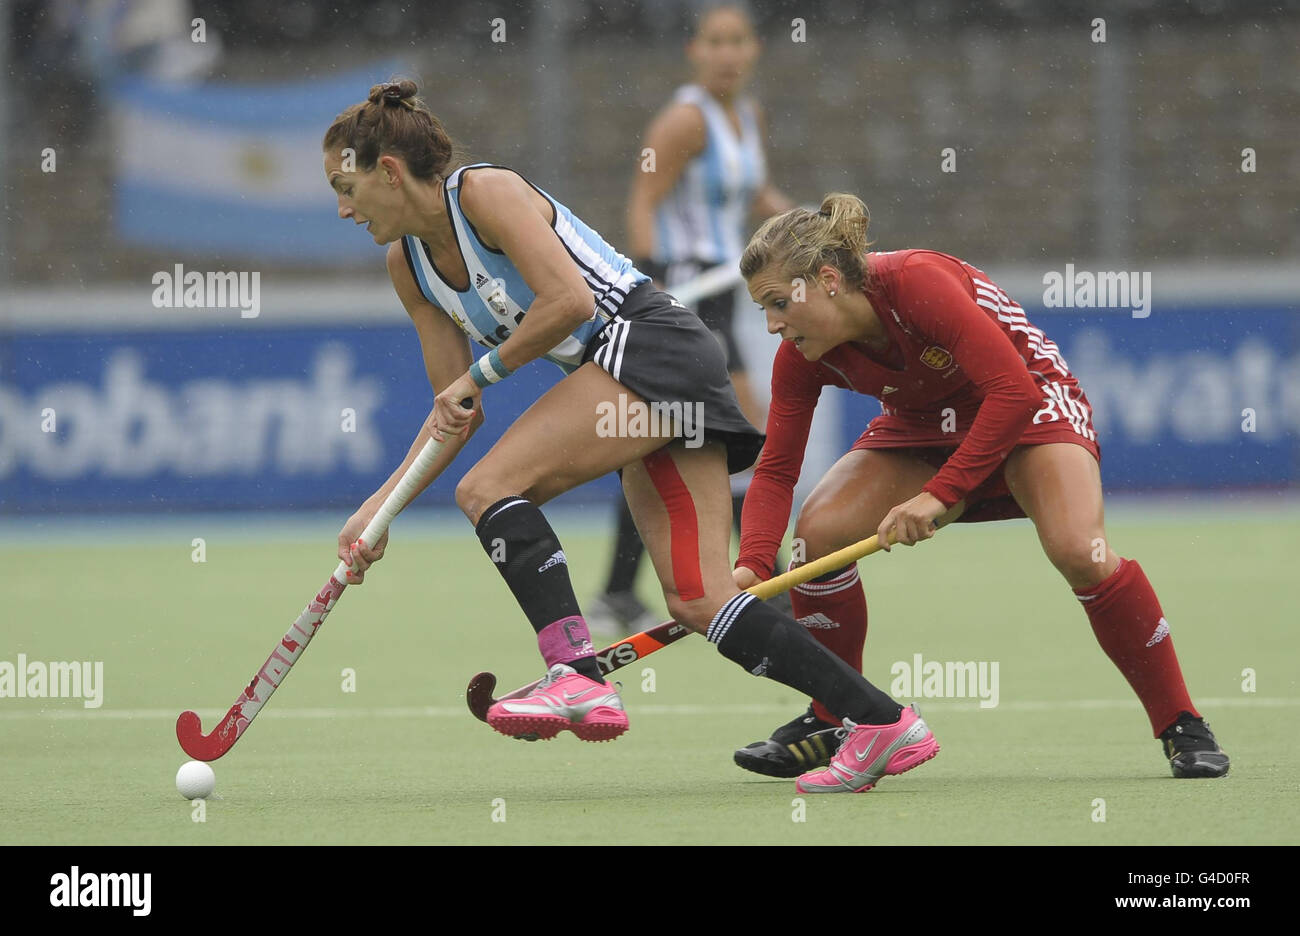 England's Georgie Twigg (right) challenges with Argentina's Luciana Aymar during their match in the Rabo FIH Women's Champions Trophy at the Wagener Stadium, Amsterdam Stock Photo